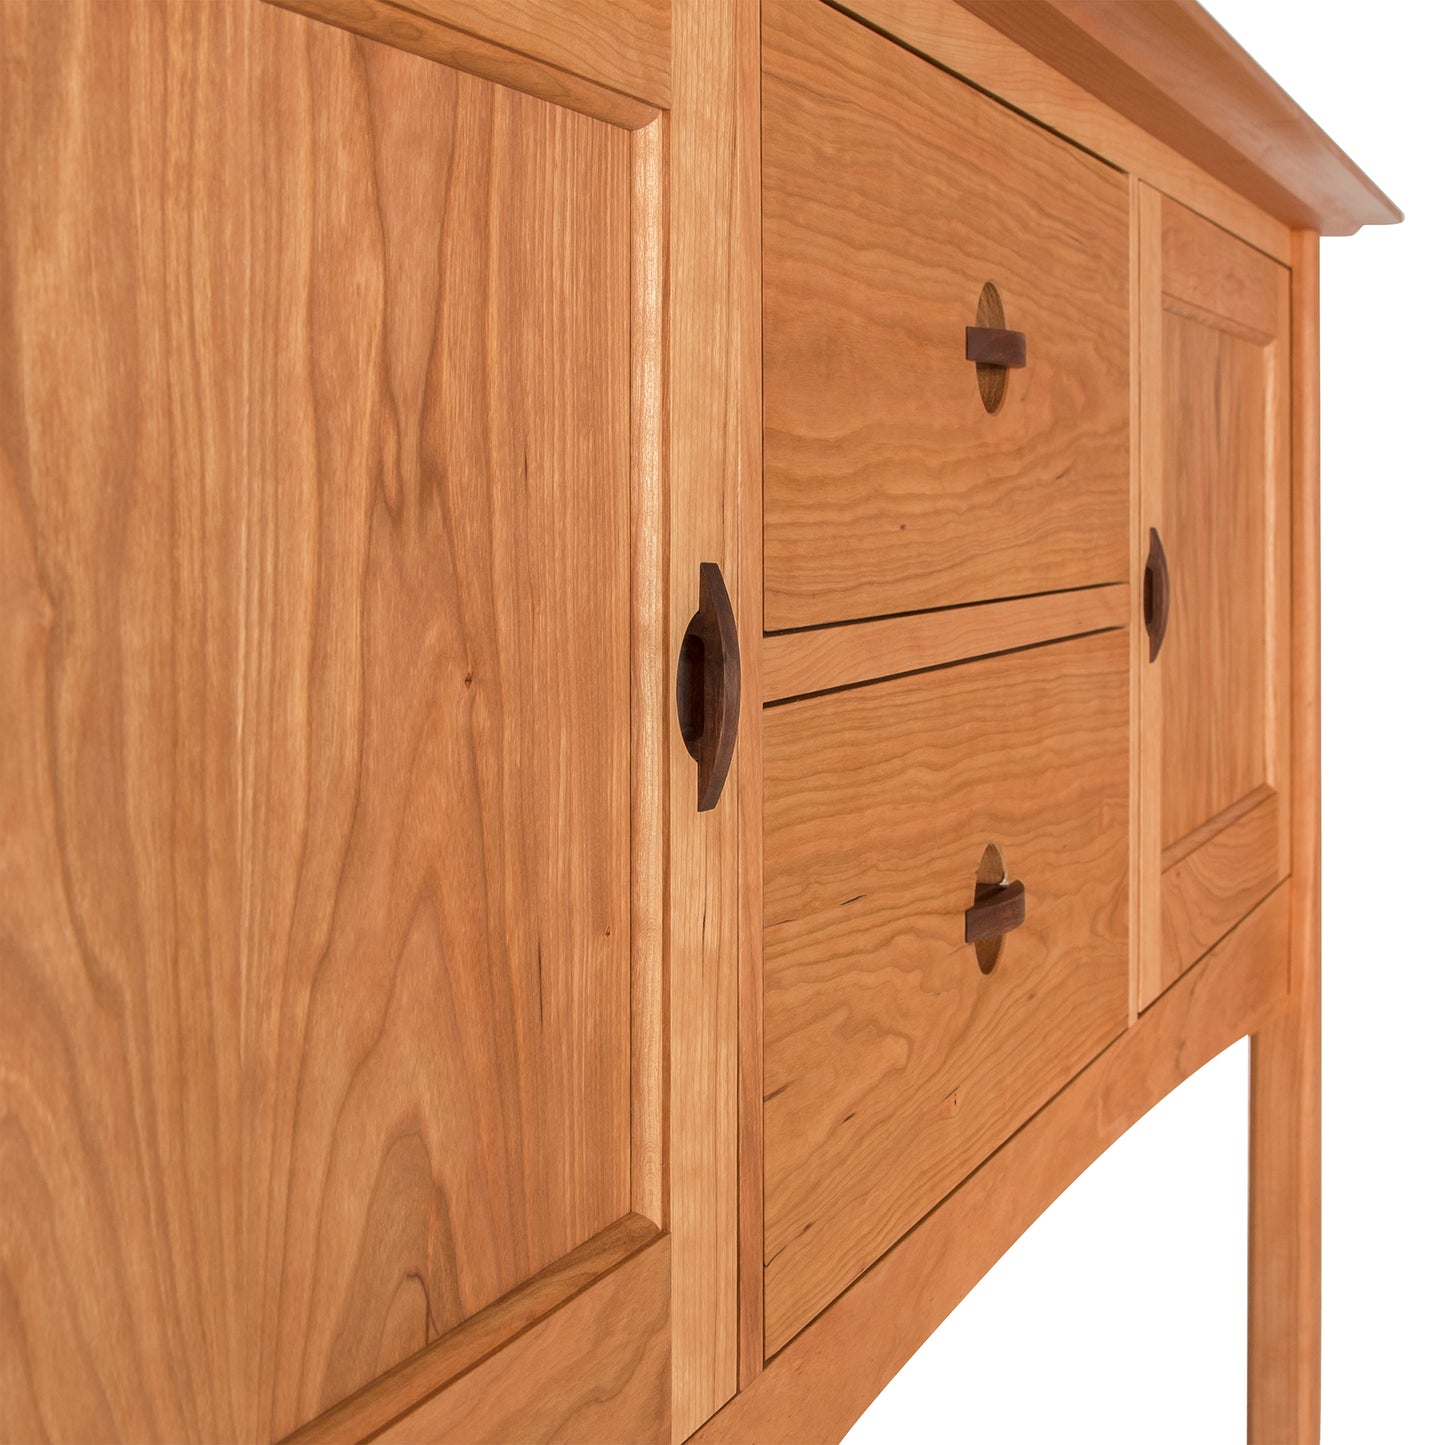 Close-up view of a Maple Corner Woodworks Cherry Moon Huntboard featuring two drawers and one door, all with dark wood knob handles, set against a plain white background.